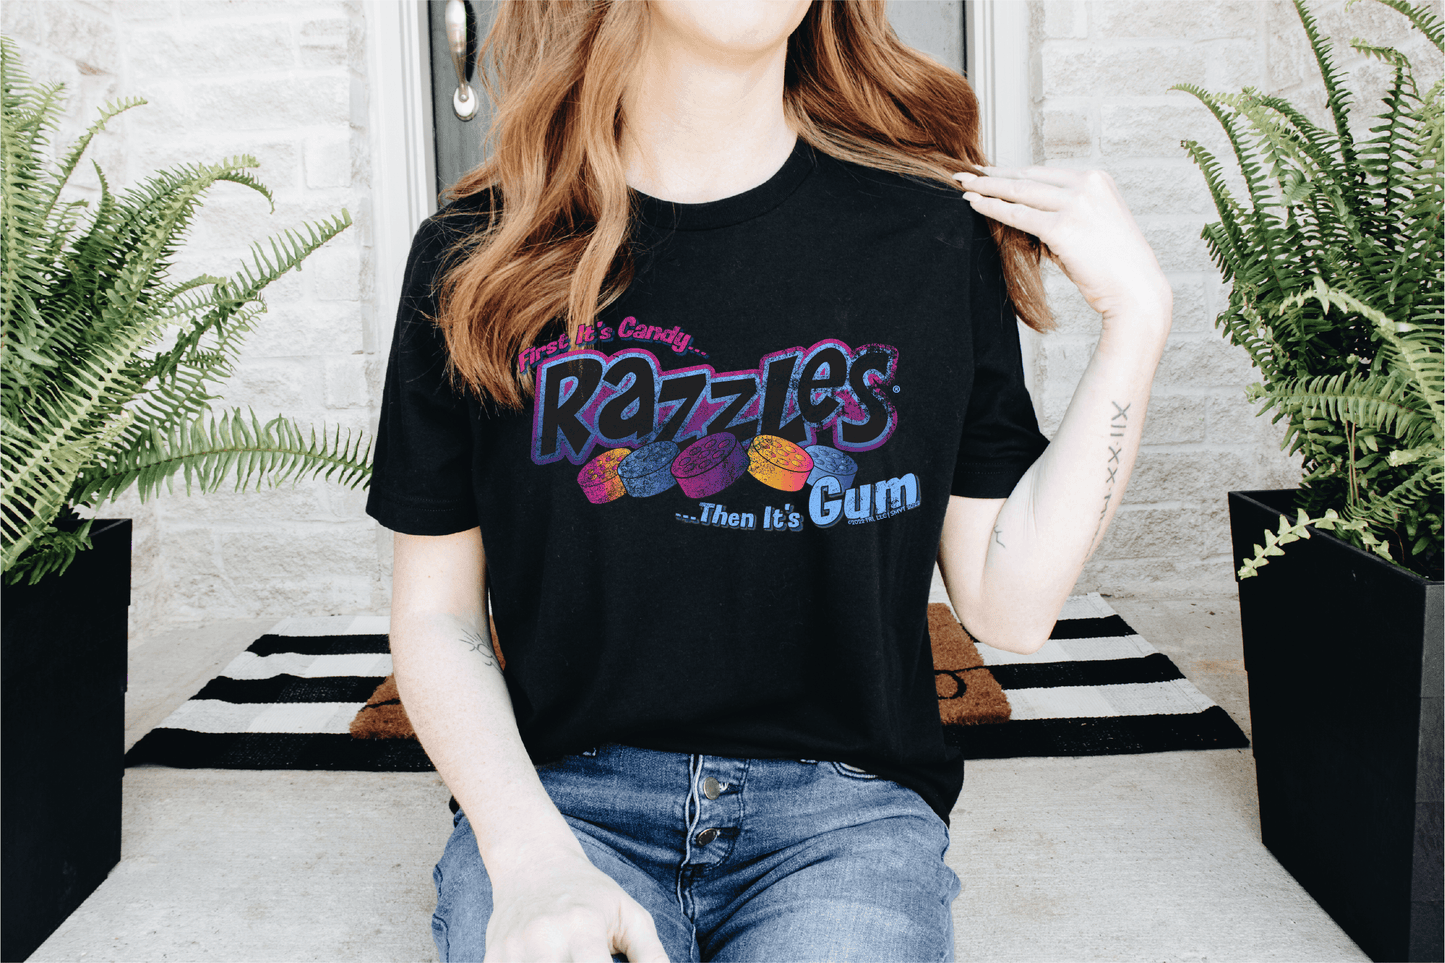 Razzles Retro Logo  First, It's Candy...Then, It's Gum! Tee